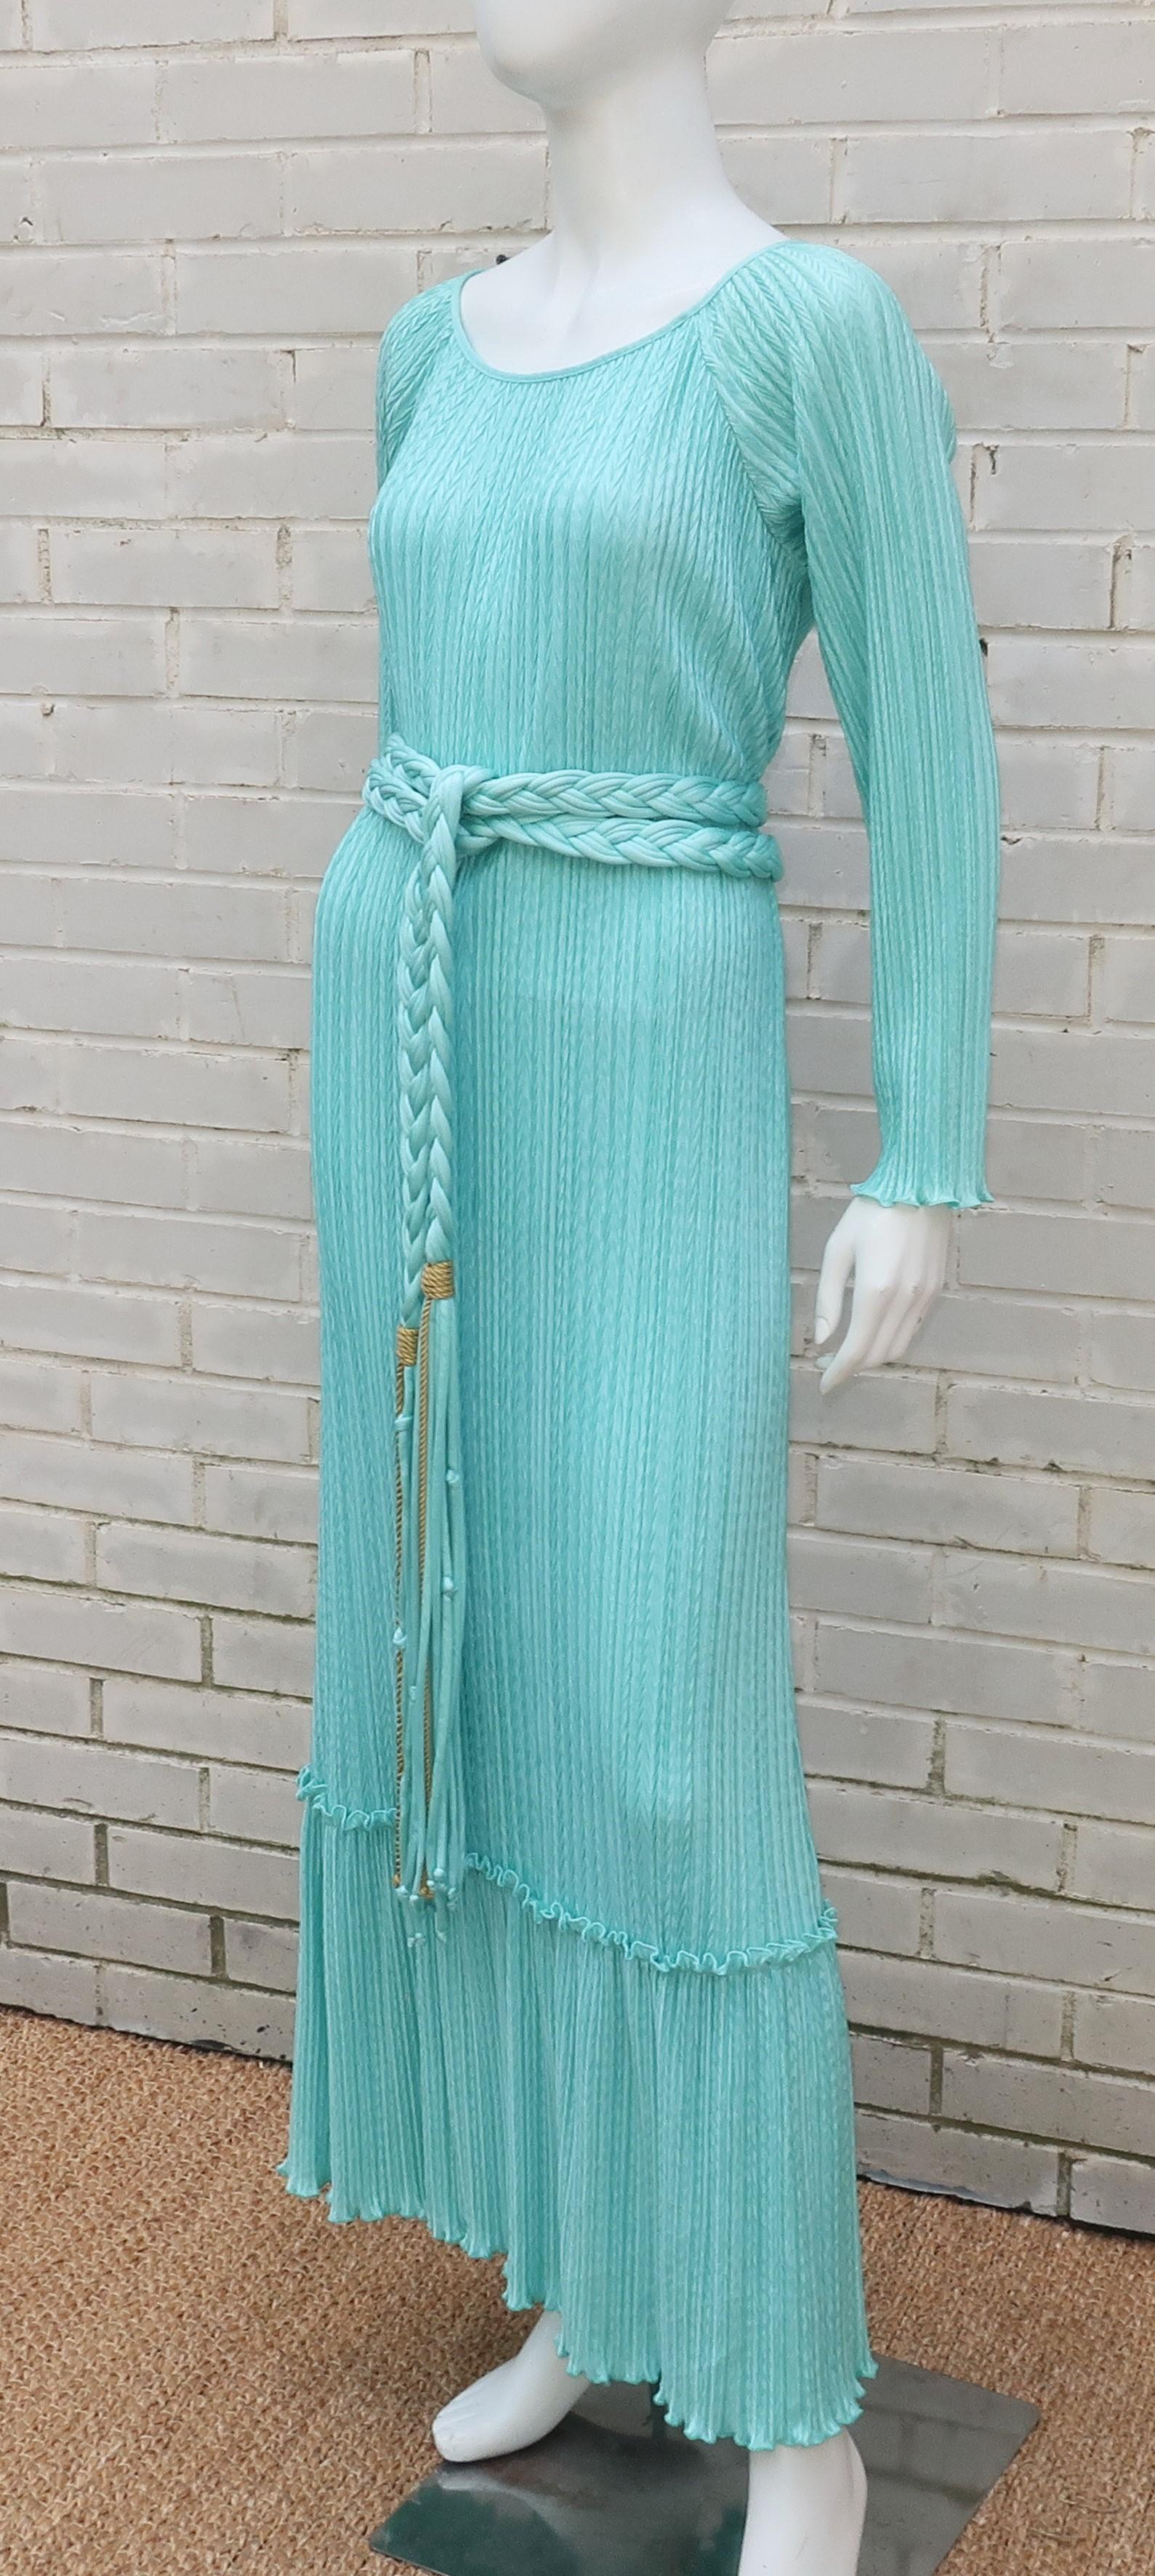 Mary McFadden creates a fabulous look for lounging or hostess wear with this aqua goddess dress in her signature micro pleated fabric with an added chevron style design.  The pullover construction features an open neckline and a tiered hem.  The